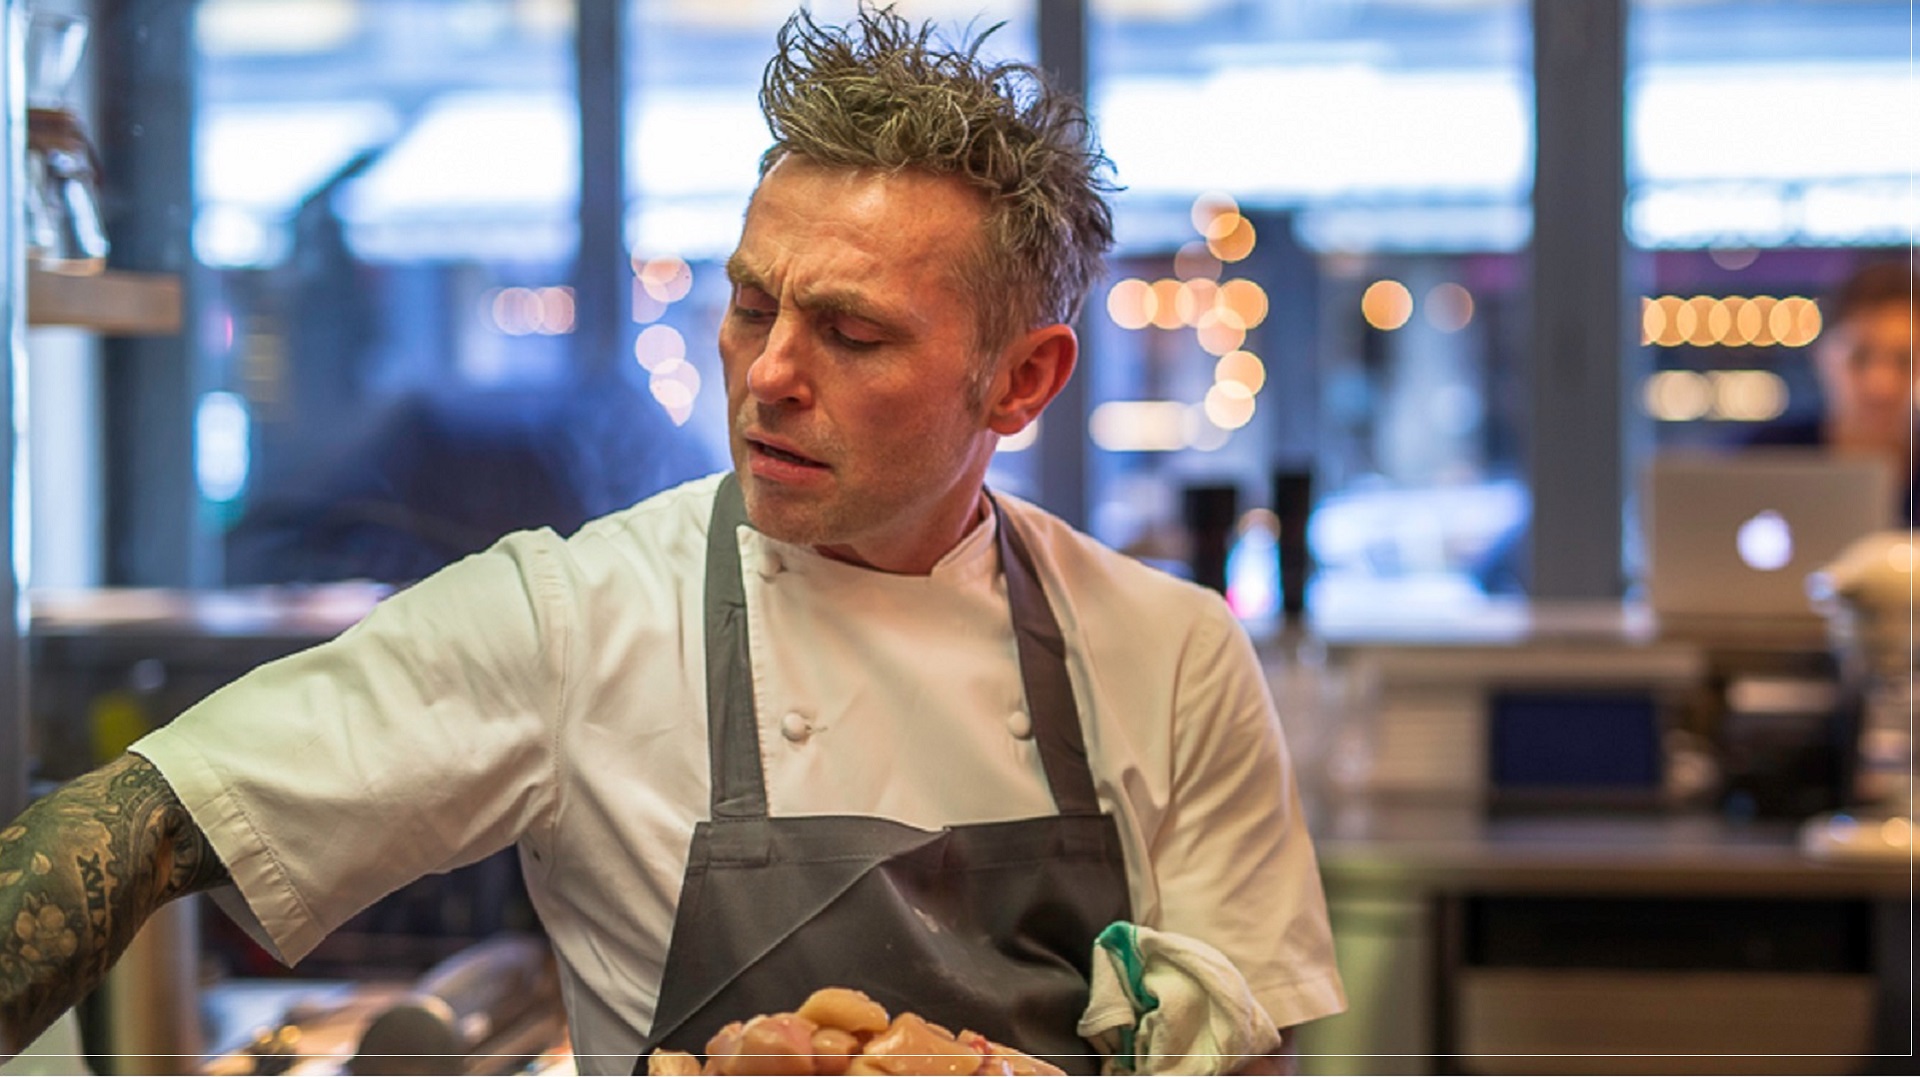 Chef Adam Simmonds is opening a restaurant staffed by homeless people